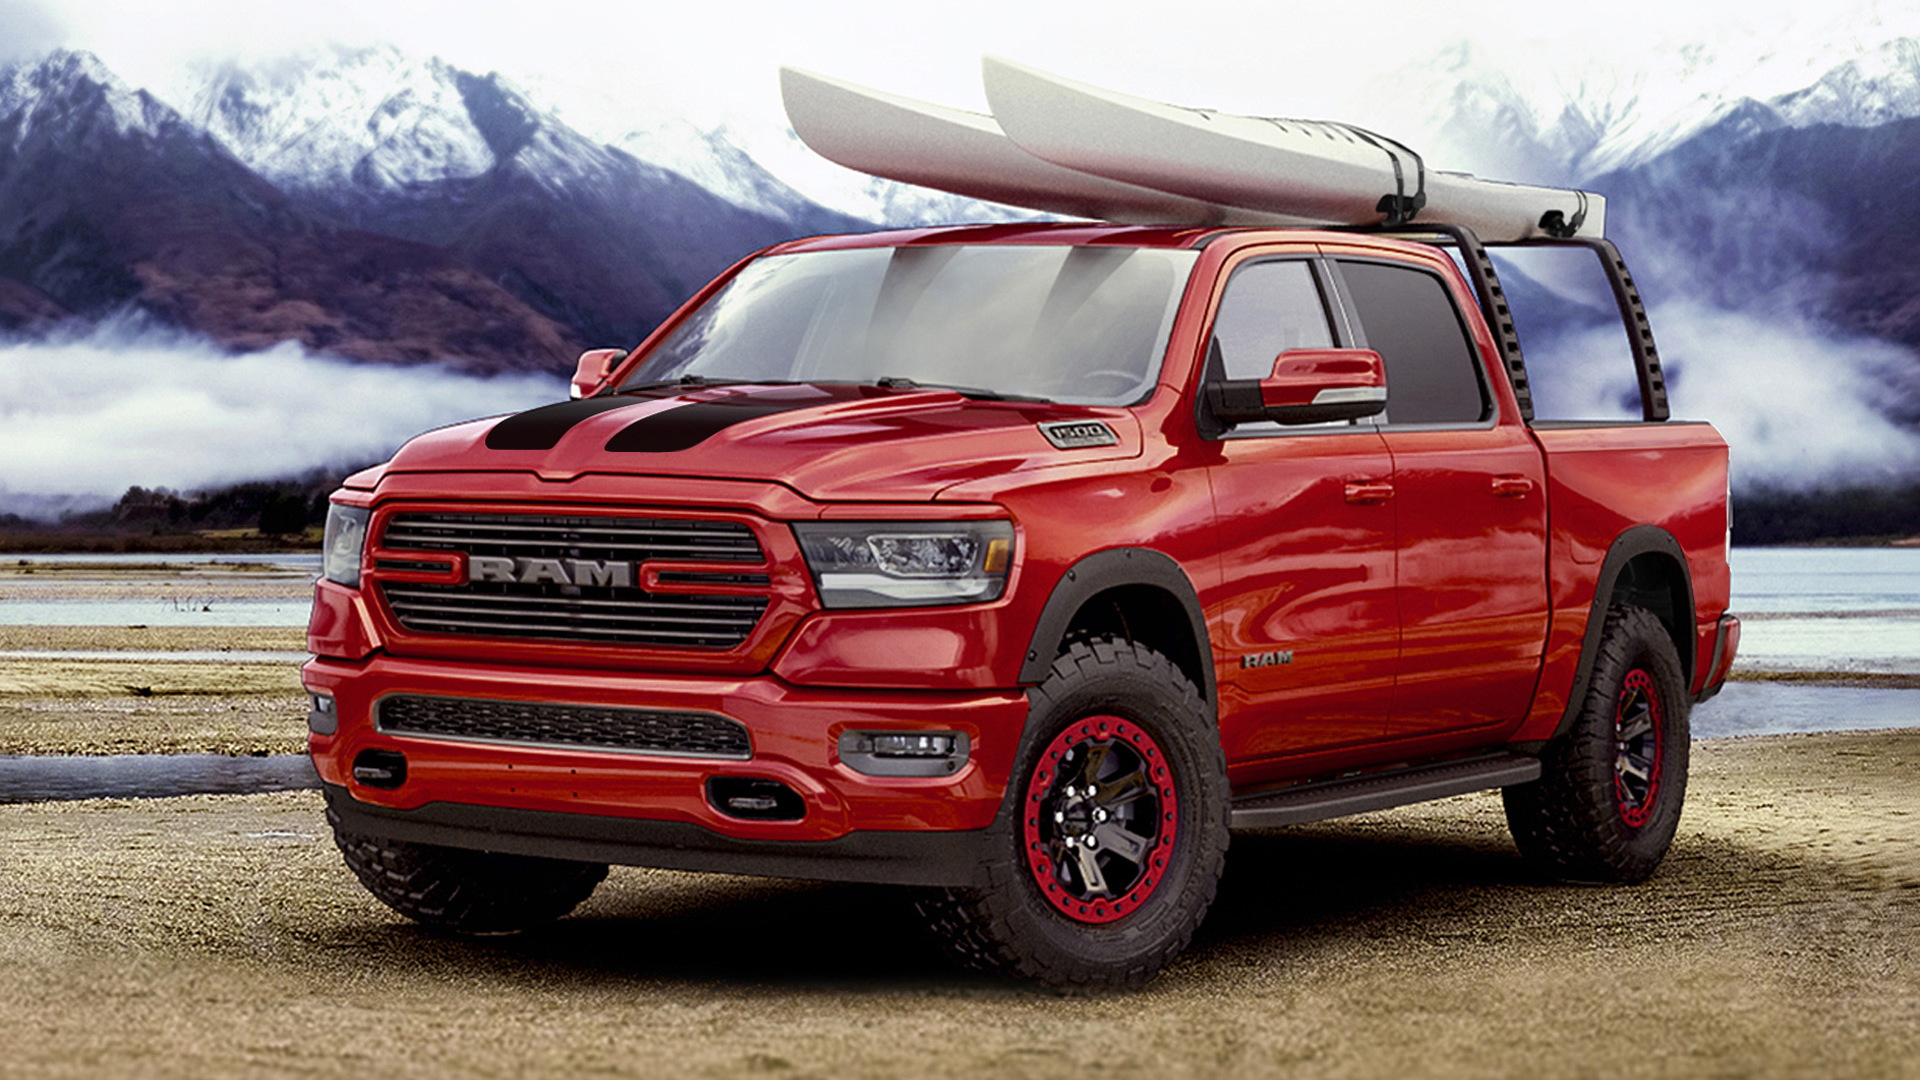 2019 Ram 1500 Big Horn Sport fitted with Mopar accessories